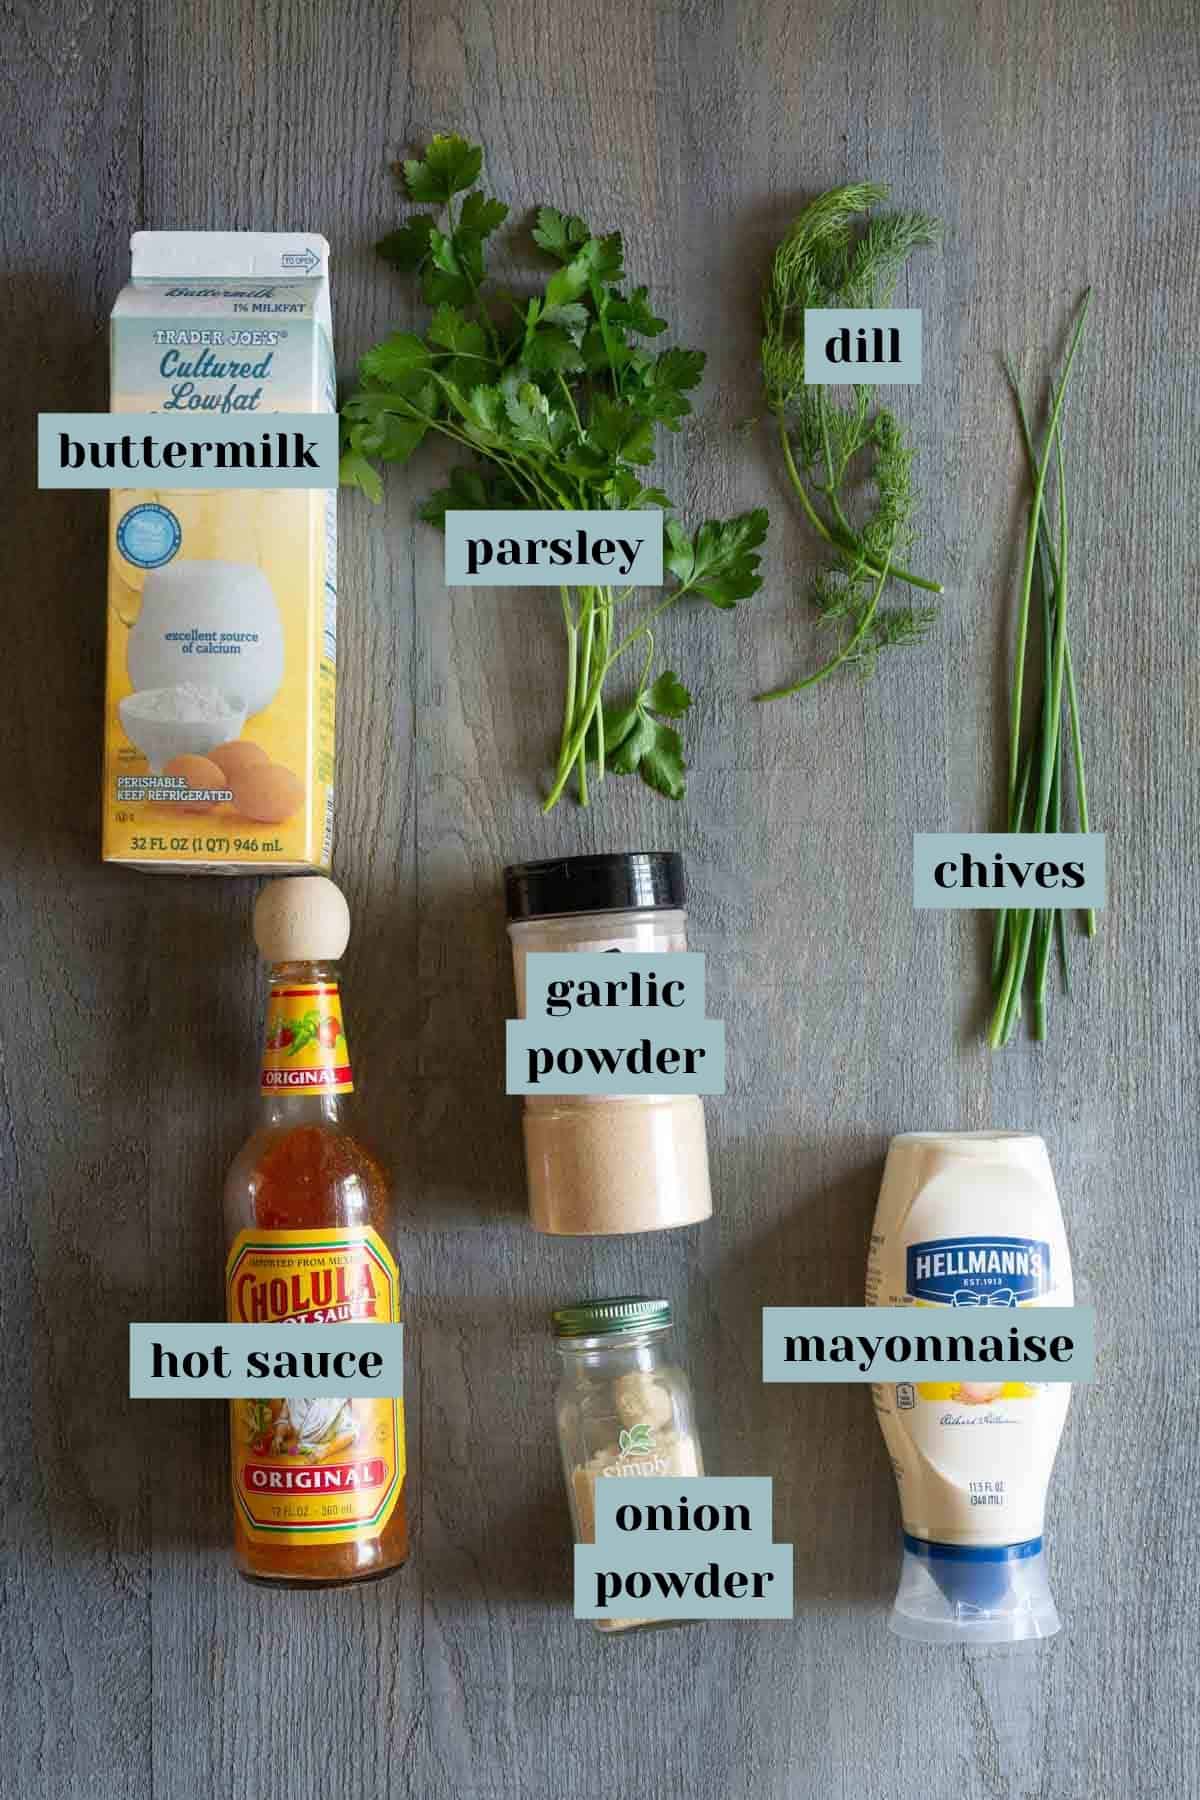 Ingredients for ranch dressing displayed on a wooden surface: buttermilk, parsley, dill, chives, garlic powder, hot sauce, onion powder, mayonnaise. Labels by each ingredient indicate their names.